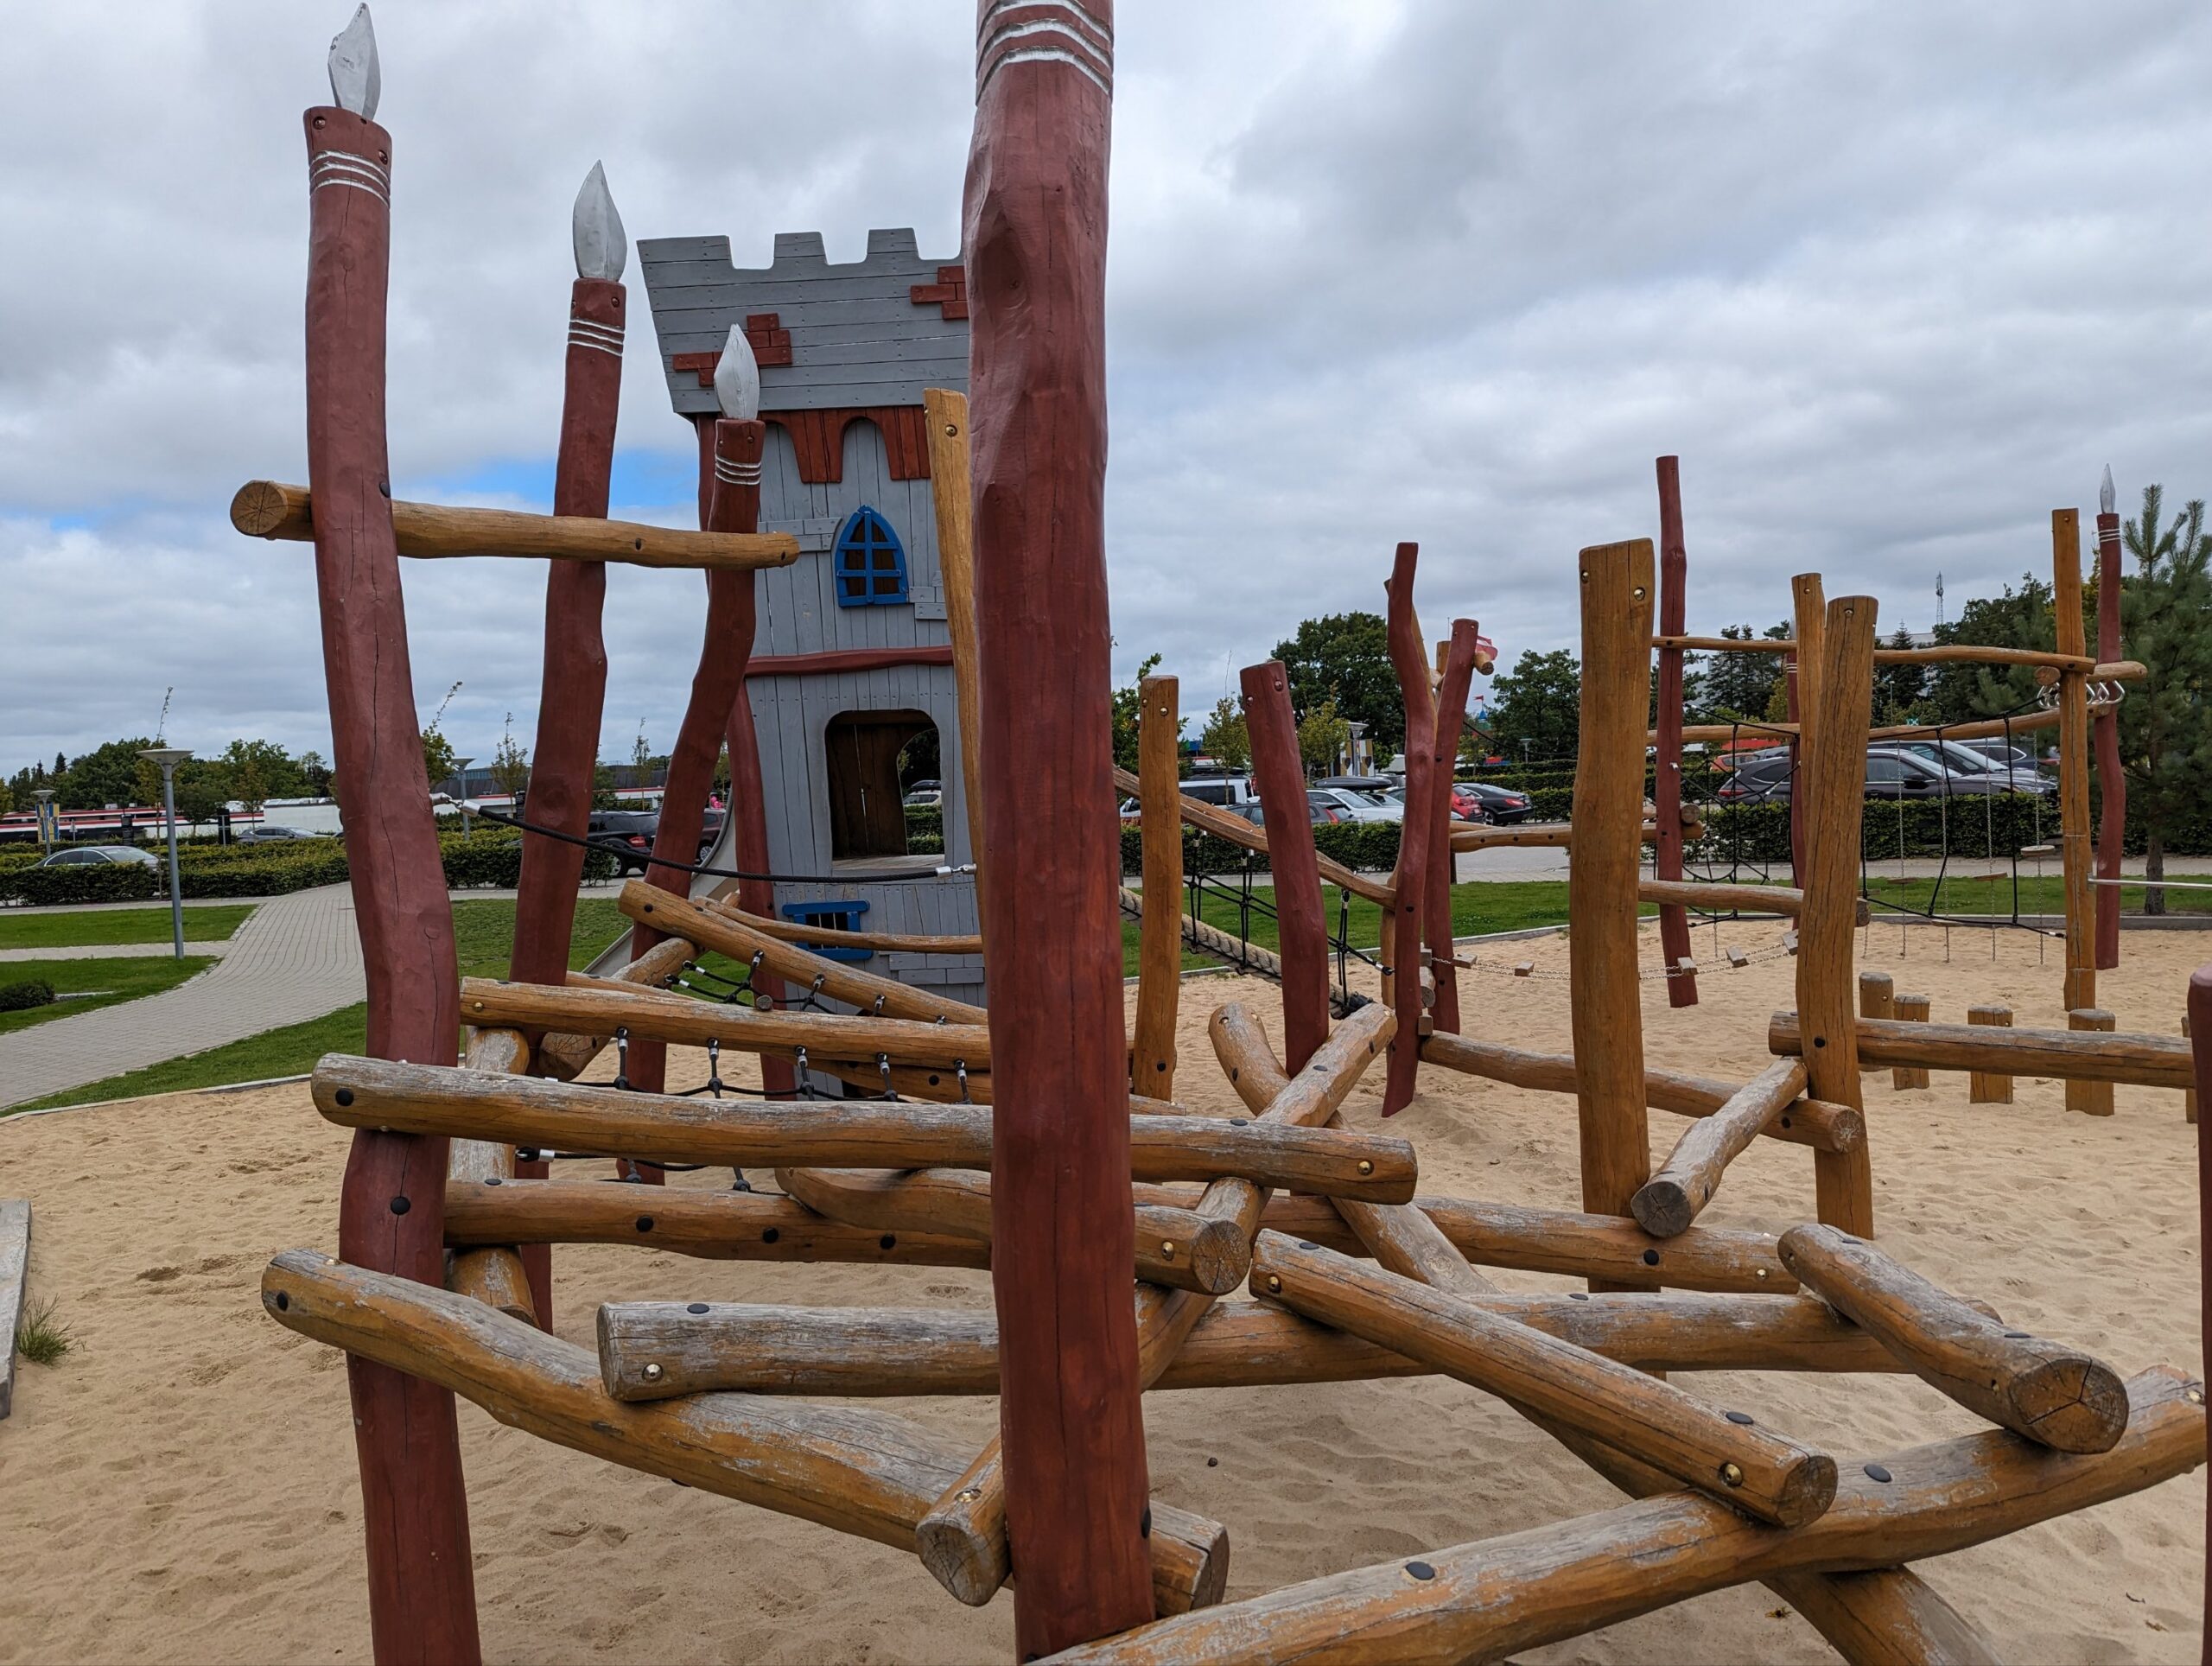 a wooden structure in a playground